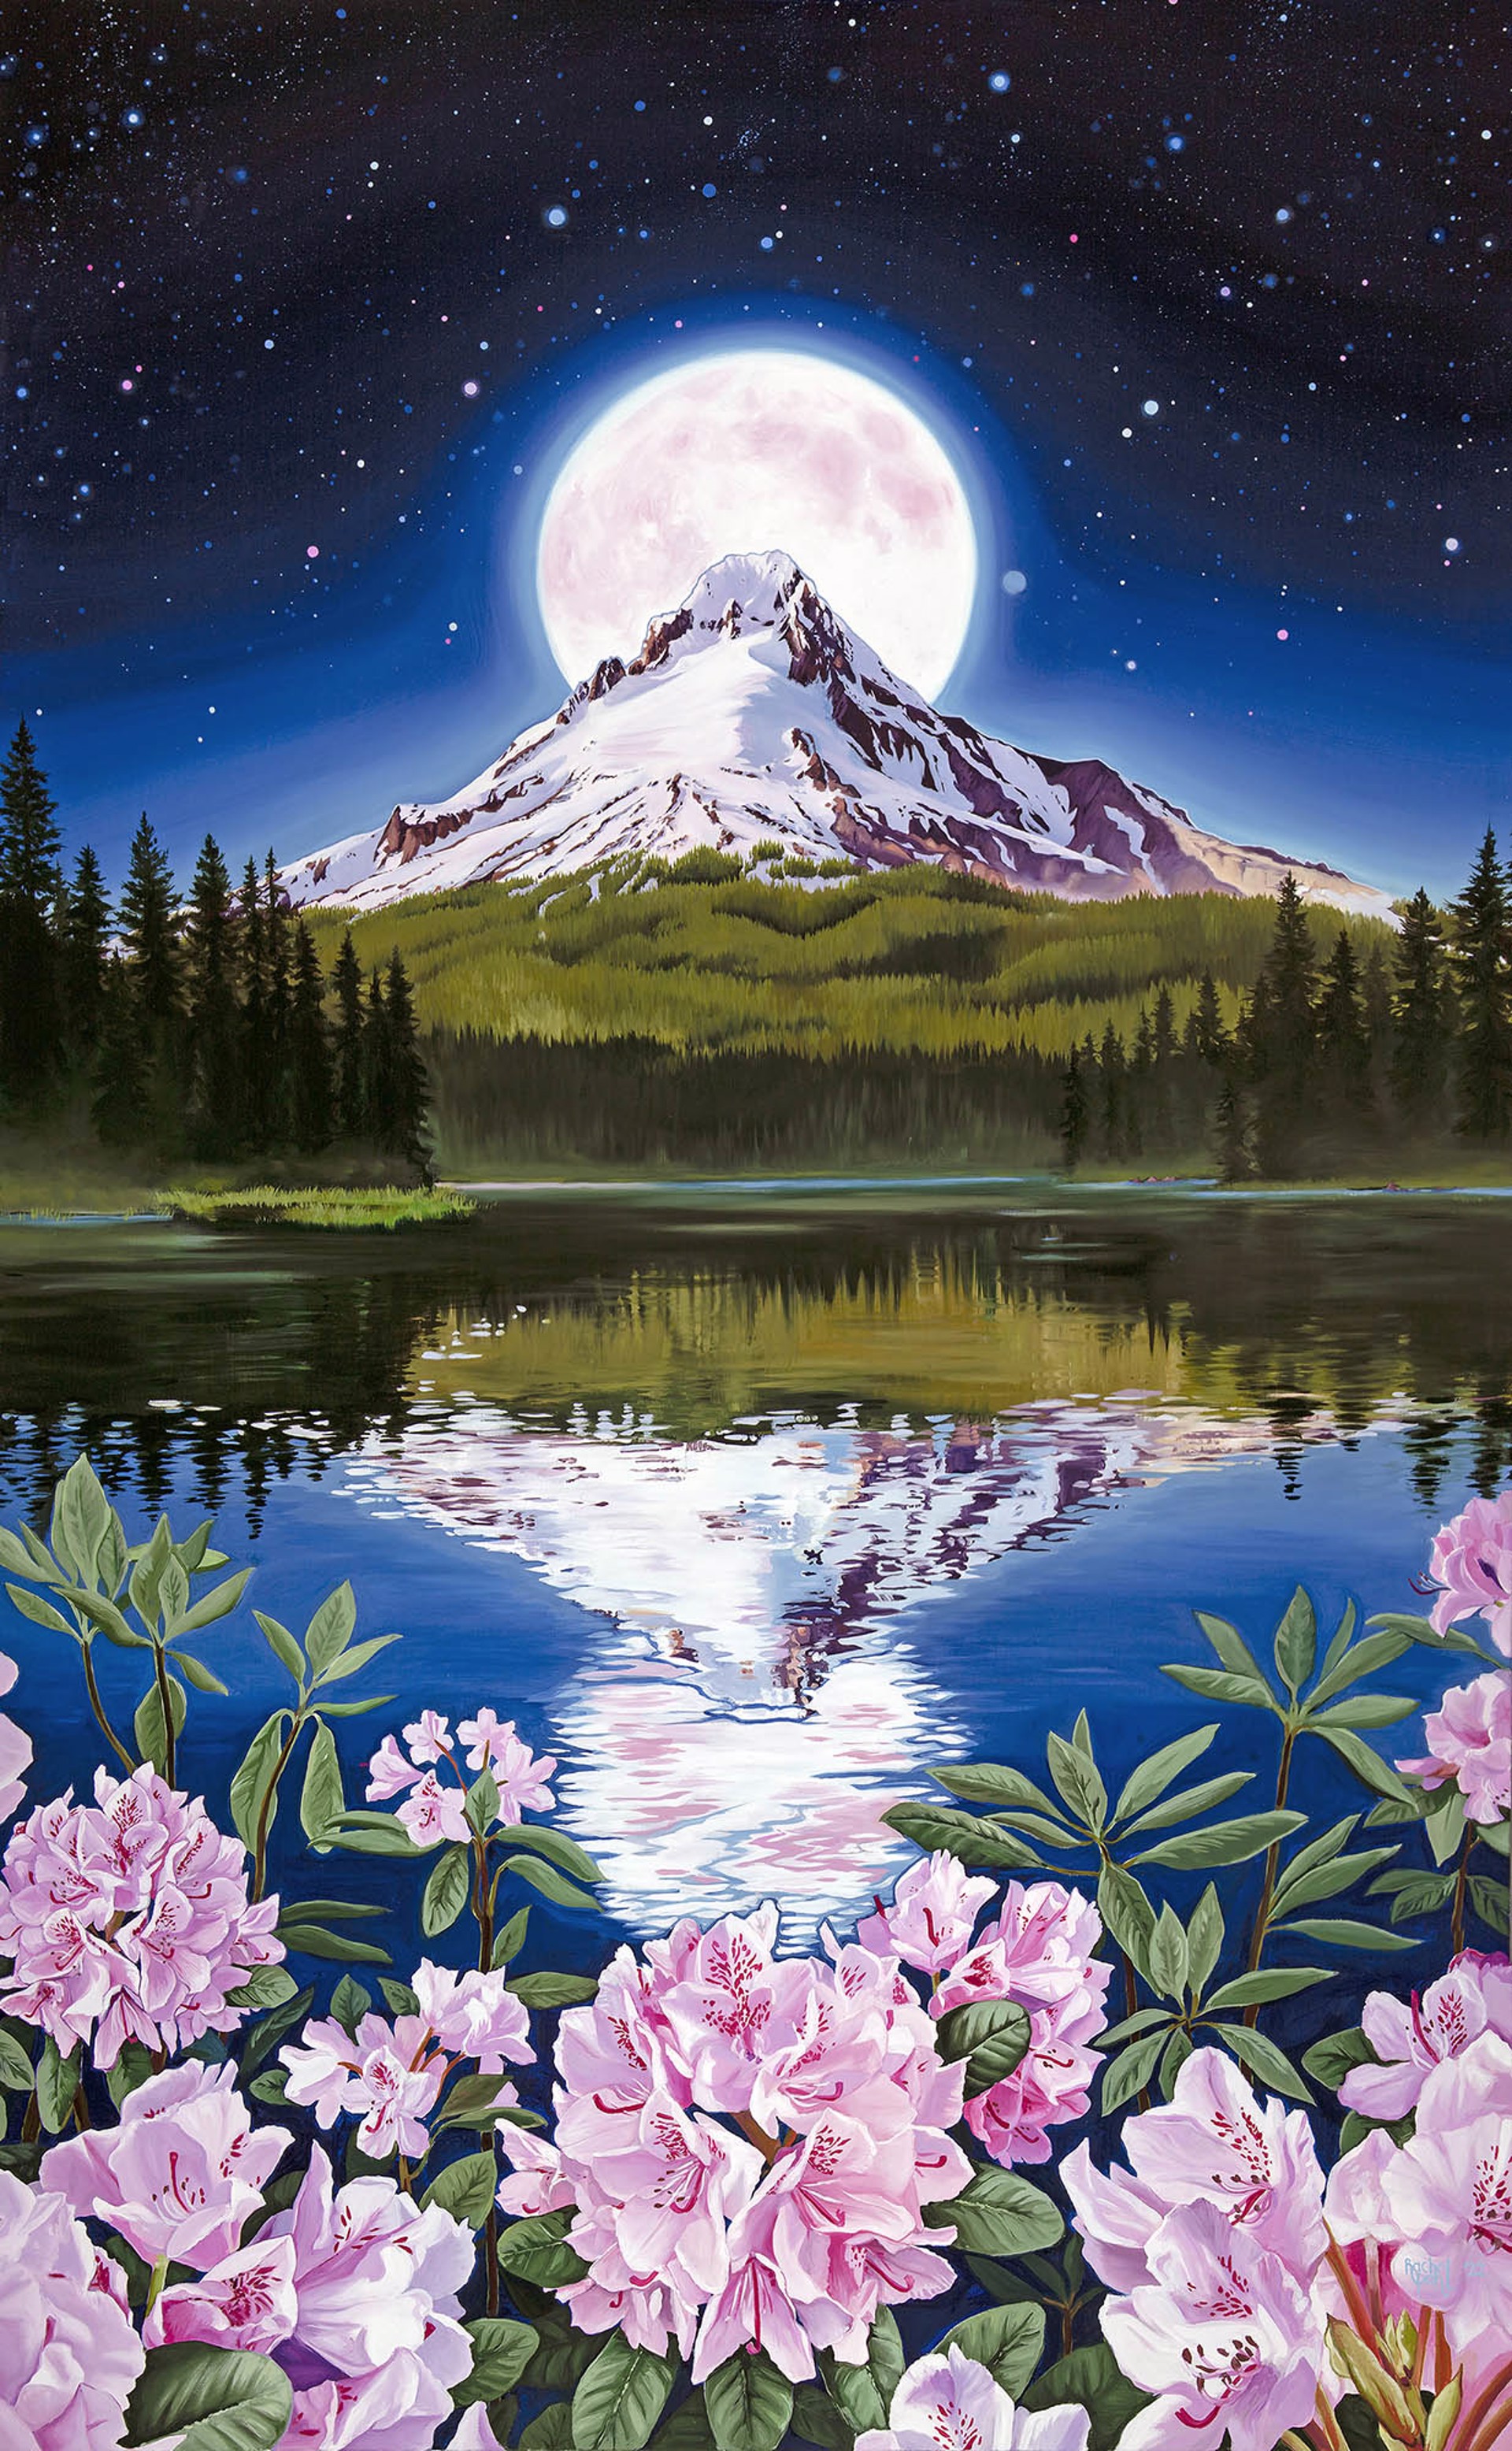 Mountain Landscape With Full Moon Illuminating The Sky And Reflecting In The Water Below